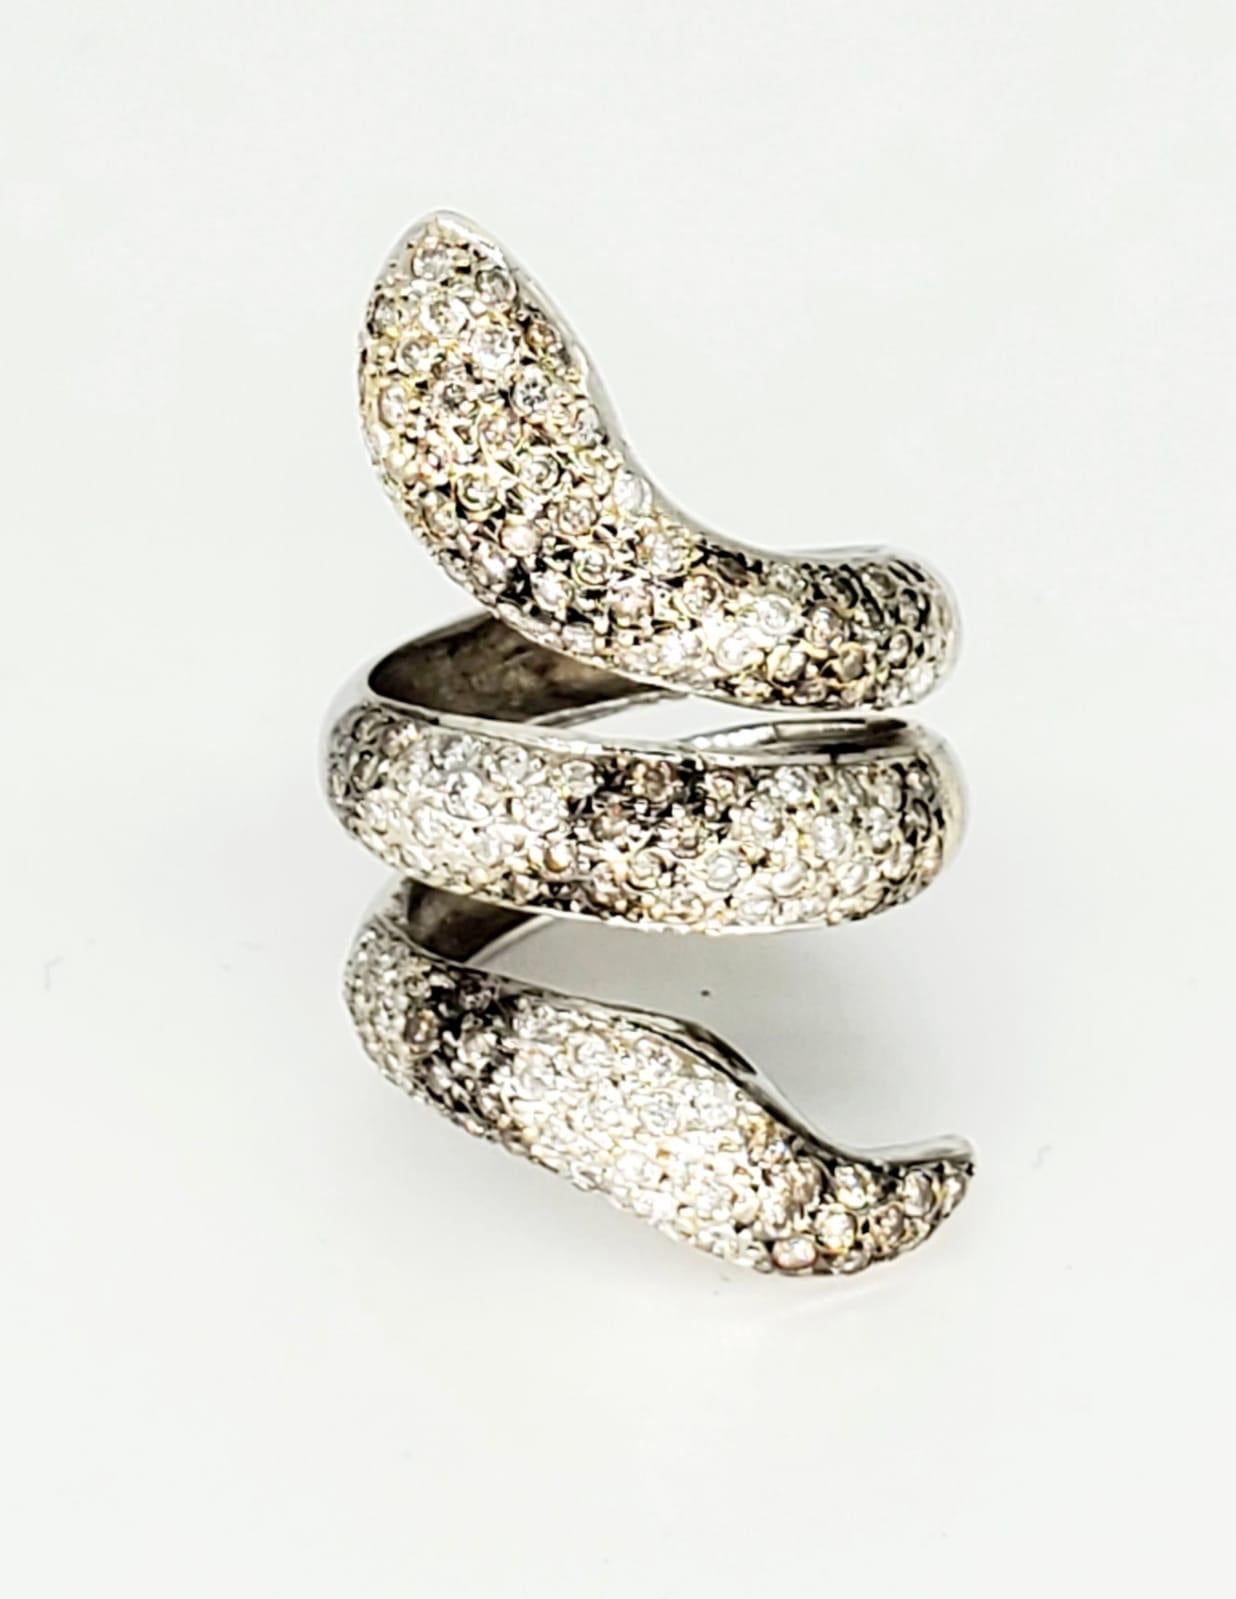 Designer ring from Brazil featuring at outstanding work of craftsmanship of a Rattle Snake. There is a total of 3 carats SI Clarity diamonds. The ring is a size 6.5 and weights 12 grams solid 18 gold.